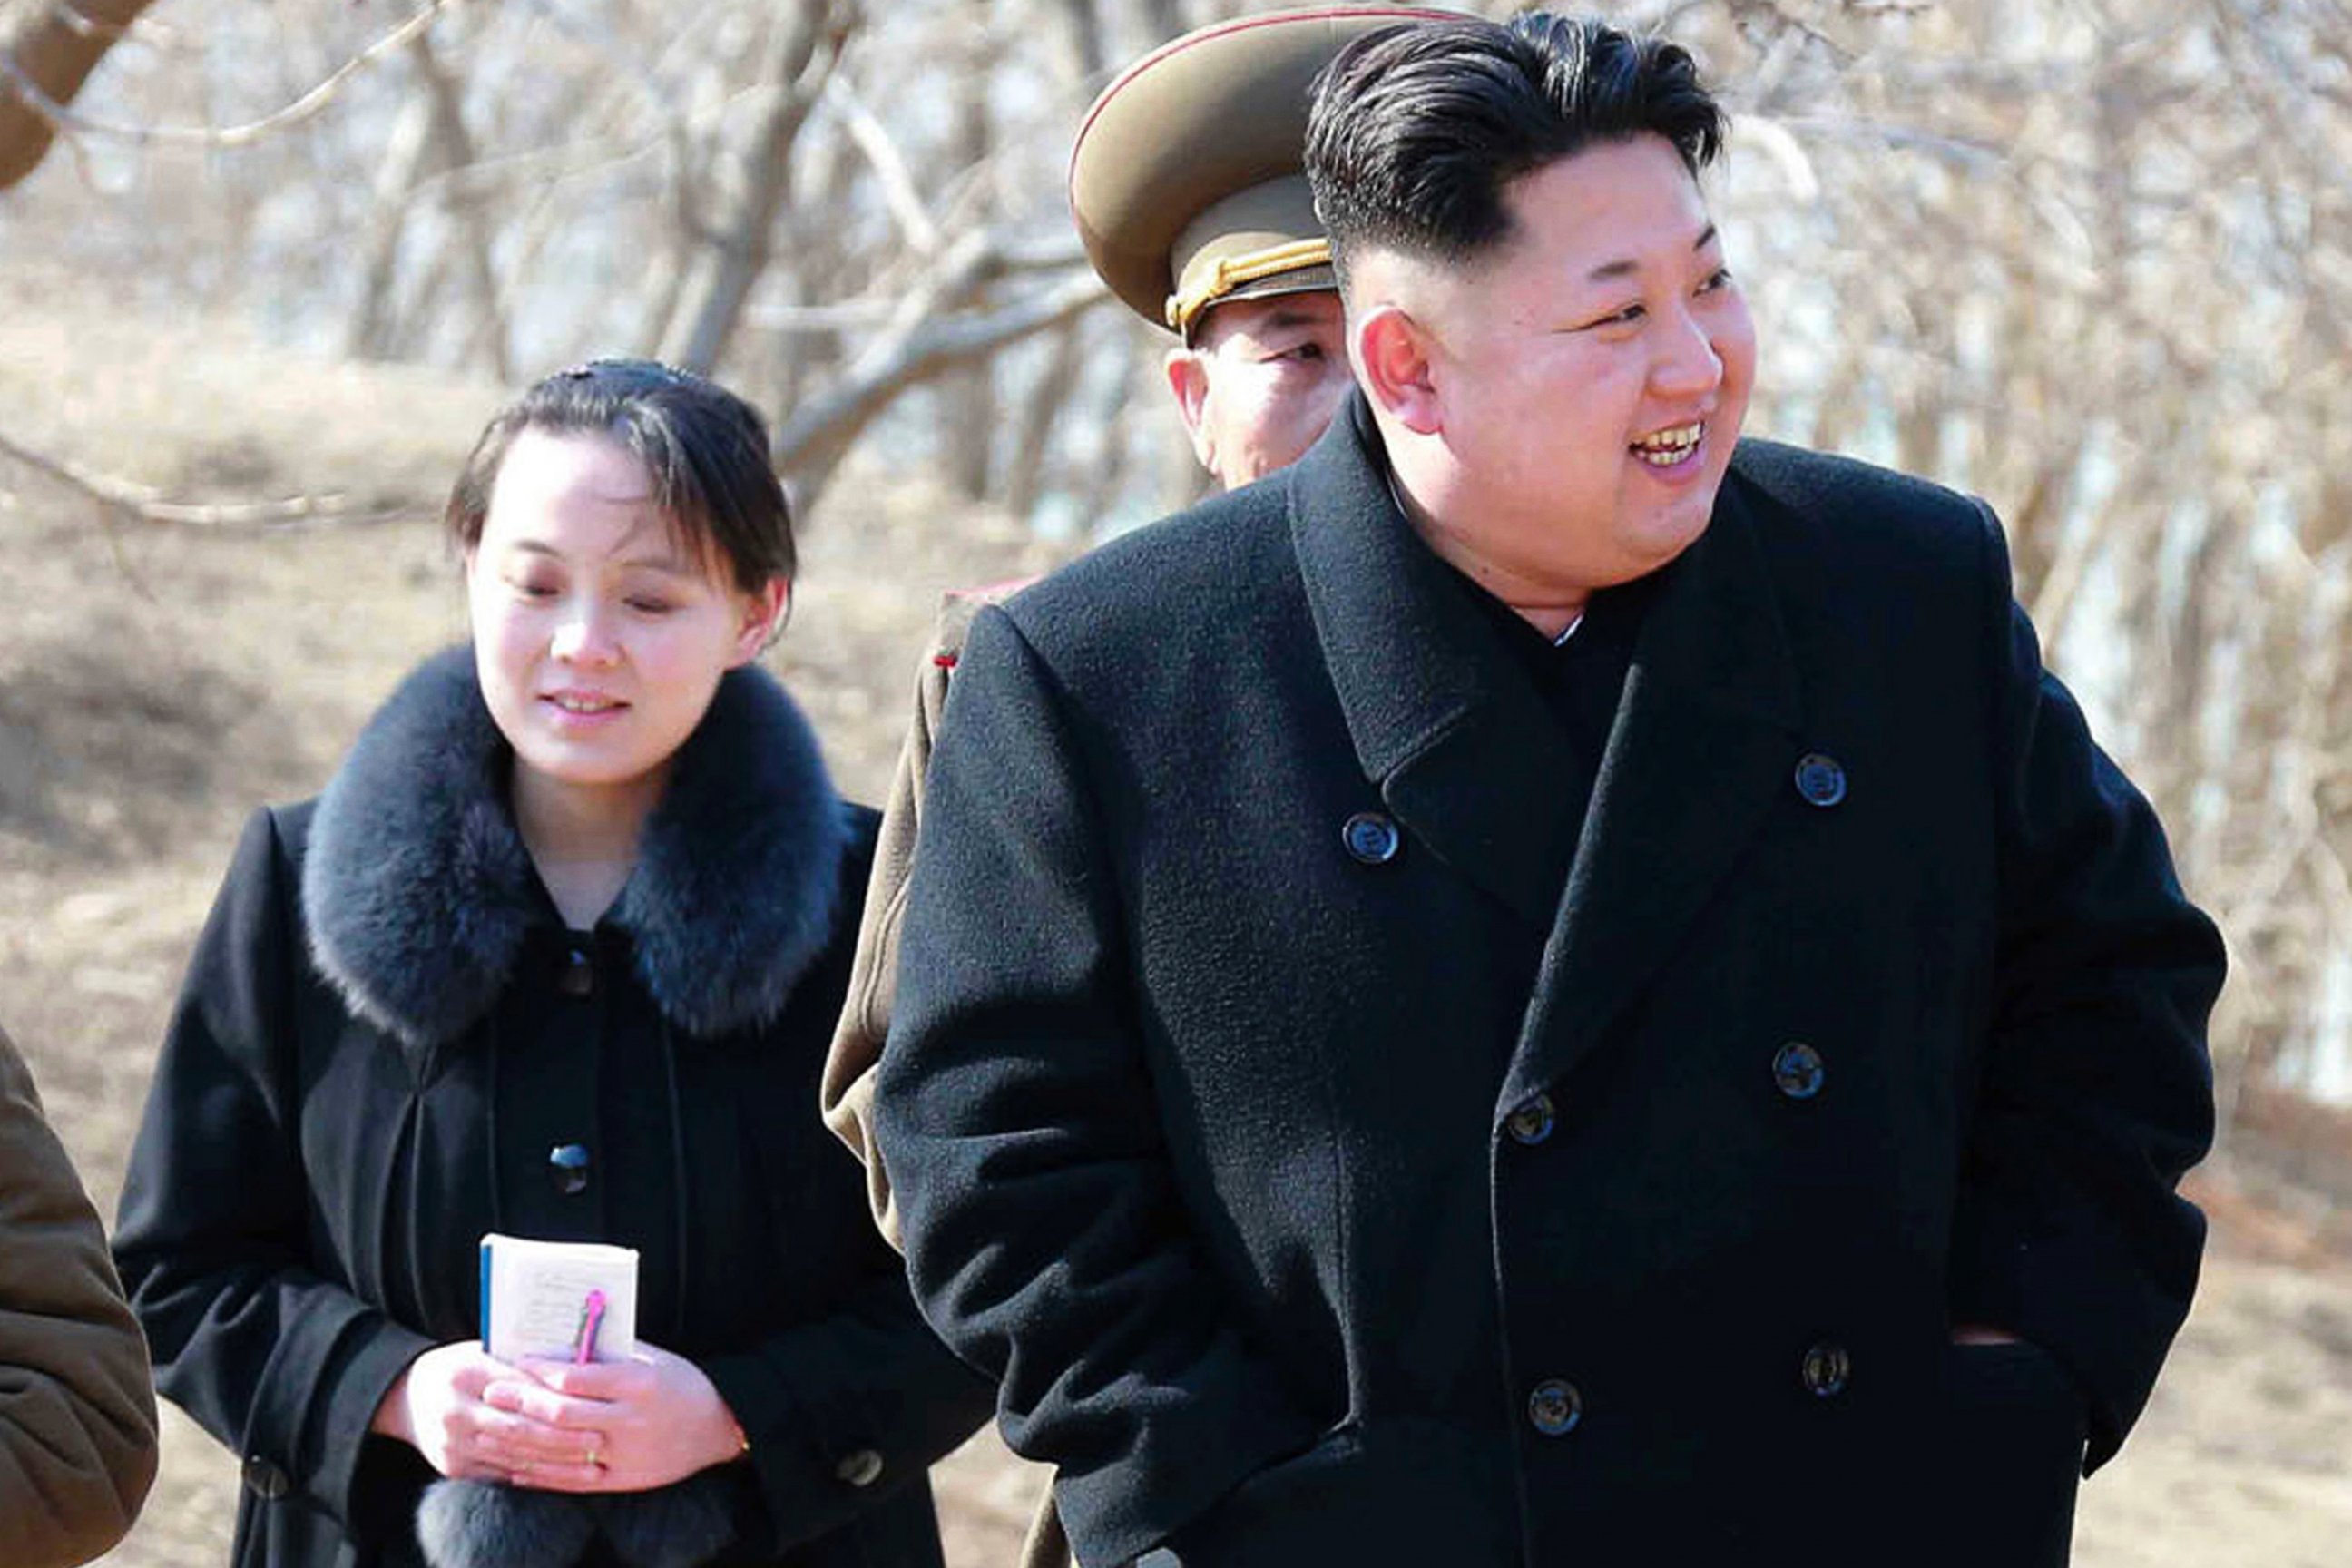 This 2015 file photo provided by the North Korean government shows North Korean leader Kim Jong Un and his sister Kim Yo Jong, left, during their visit to a military unit in North Korea.